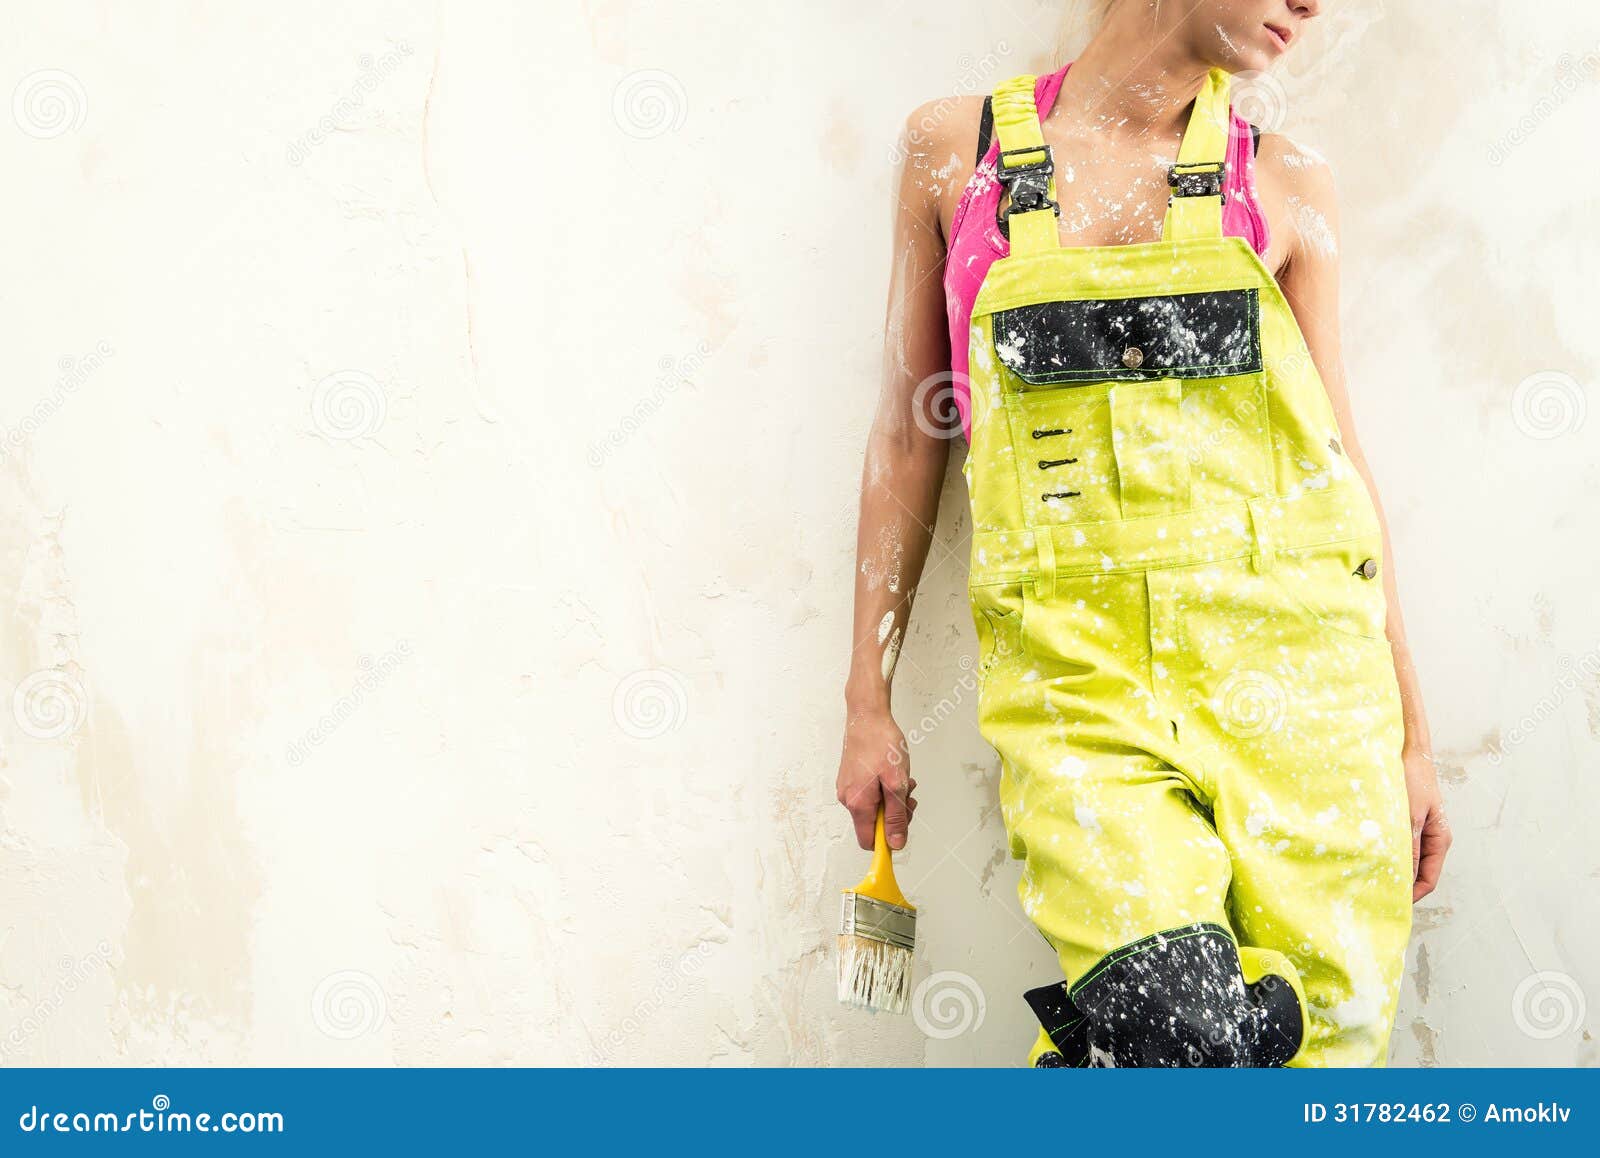 female in coverall indoors